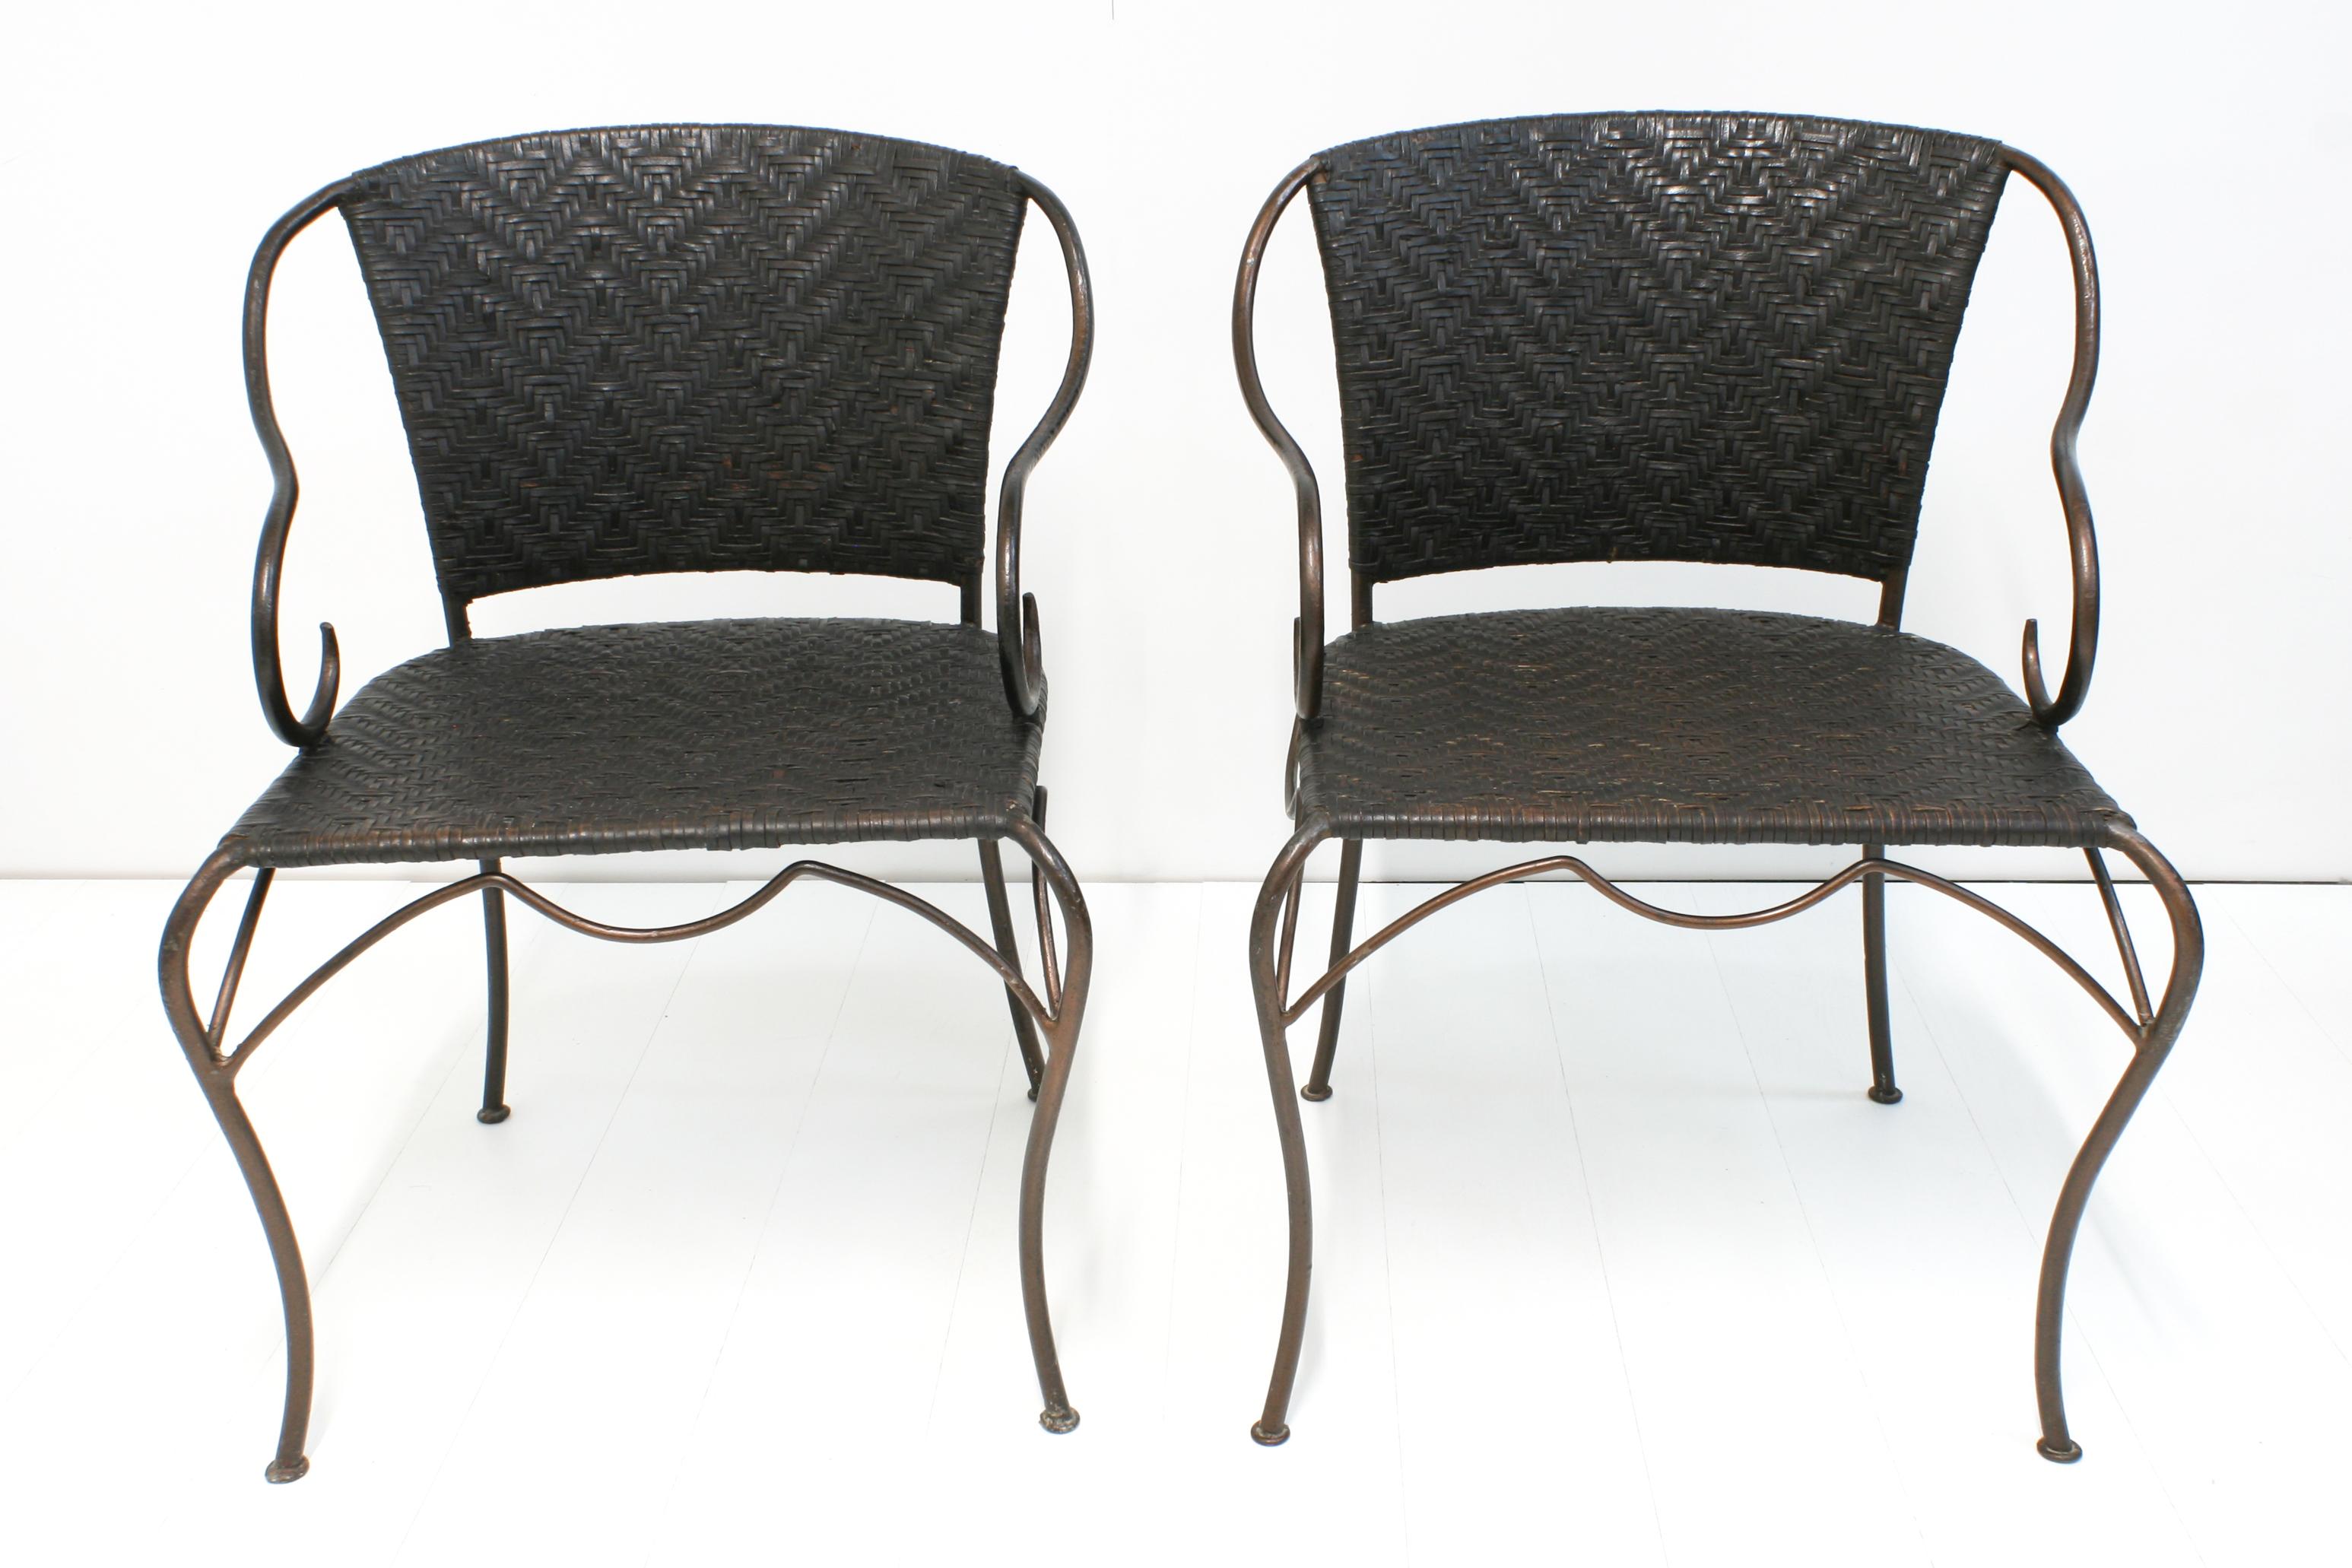 8x Wrought Iron & Leather Anatol Dining Armchairs by Gunther Lambert, 1990s For Sale 3